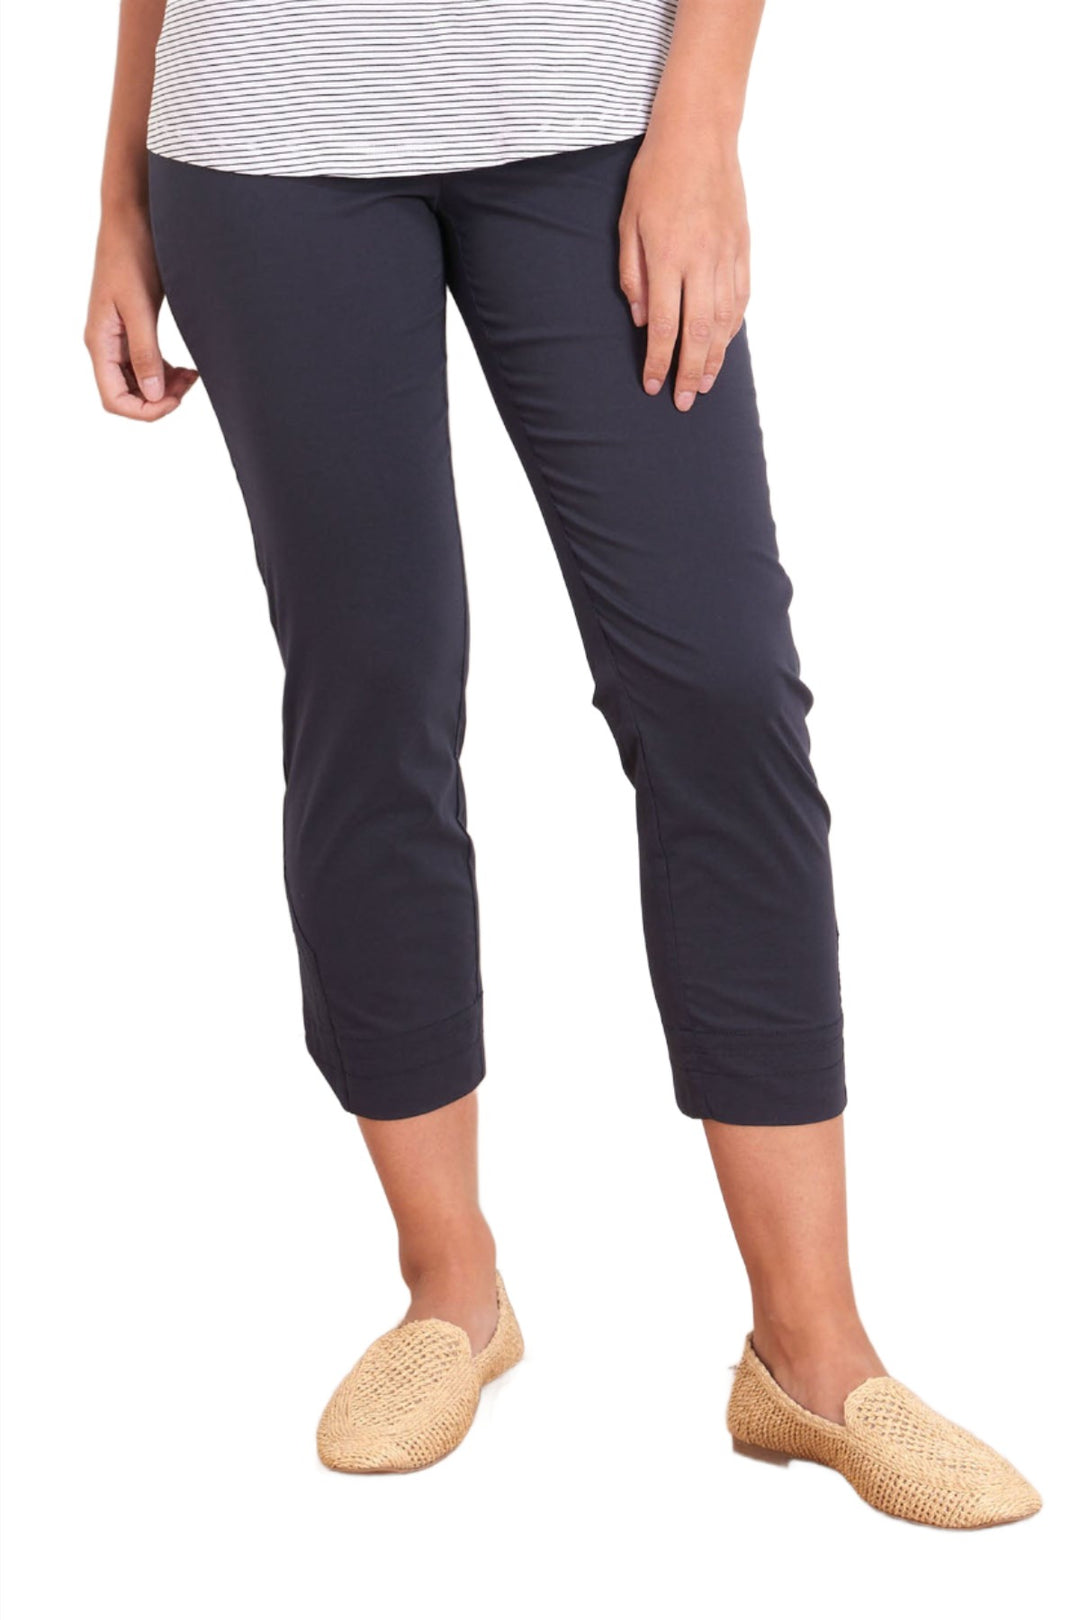 Woman wearing 7/8 Trapeze Pants in Navy by FOIL and tan shoes sold and shipped from Pizazz Boutique Nelson Bay Women's Clothing Shops online Australia